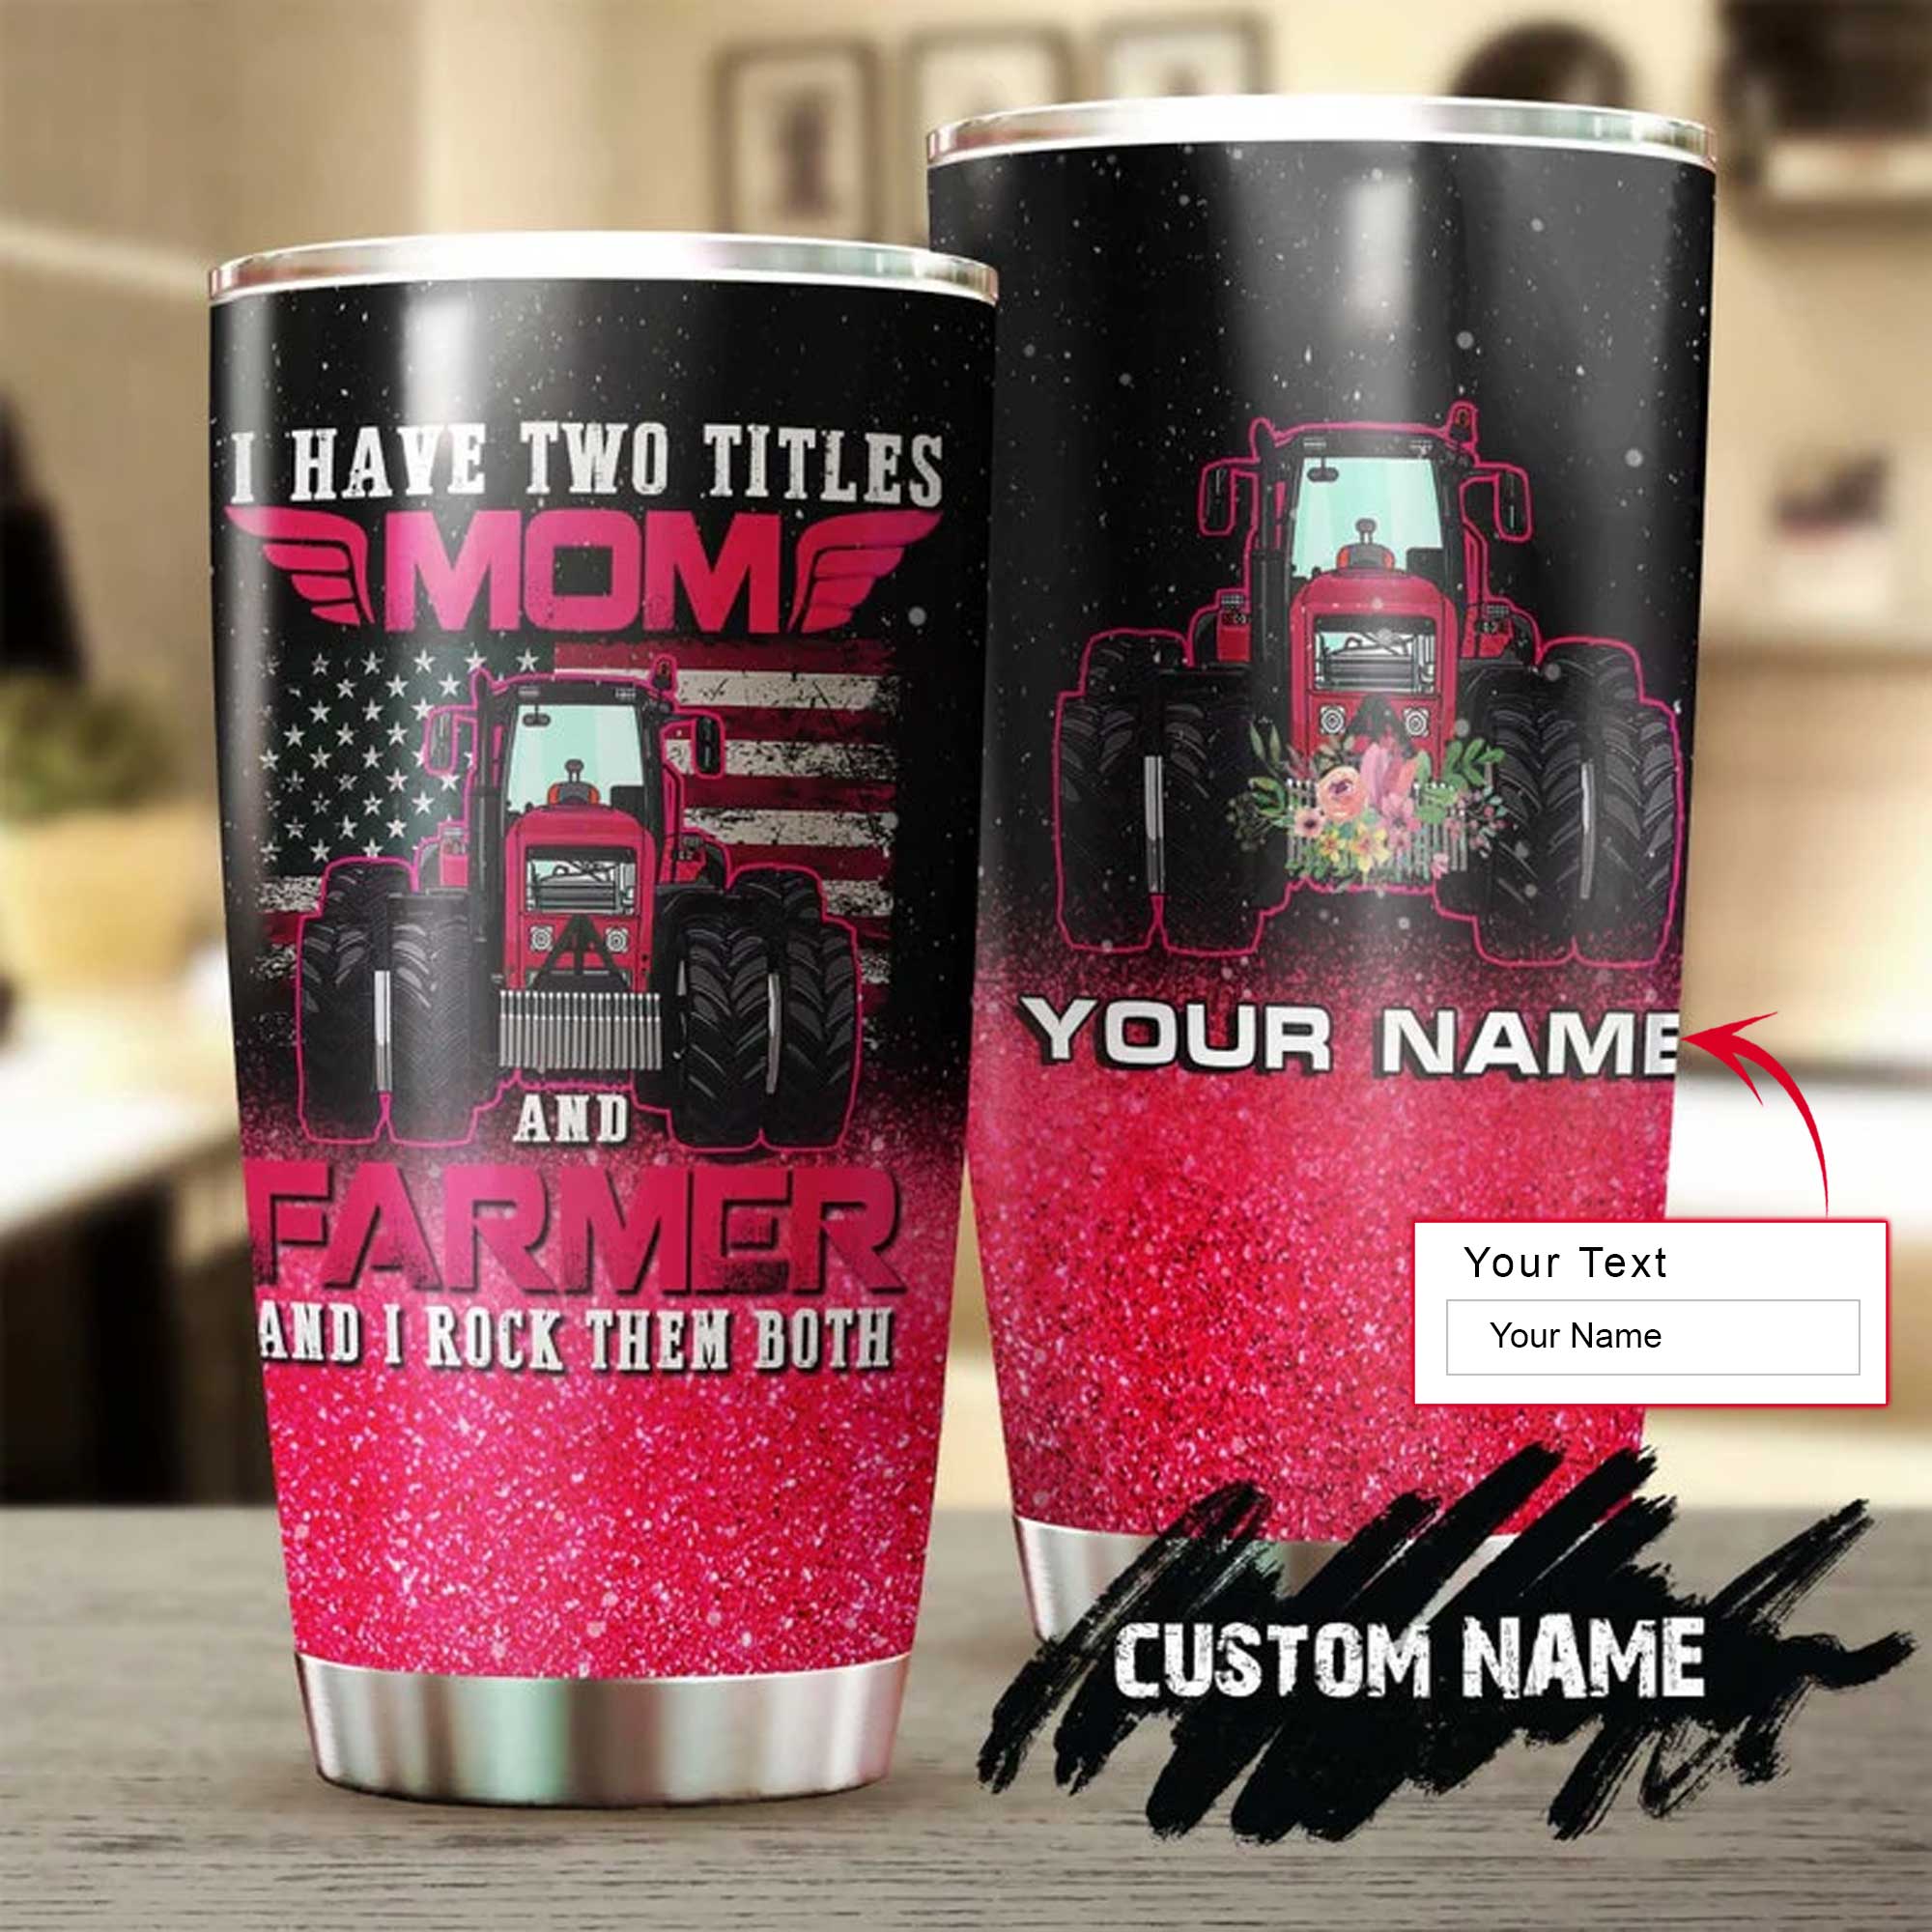 Personalized Mother's Day Gift Tumbler - Custom Gift For Mother's Day, Presents for Mom - Mom And Farmer Ladies, I Have Rocked Them Both Tumbler